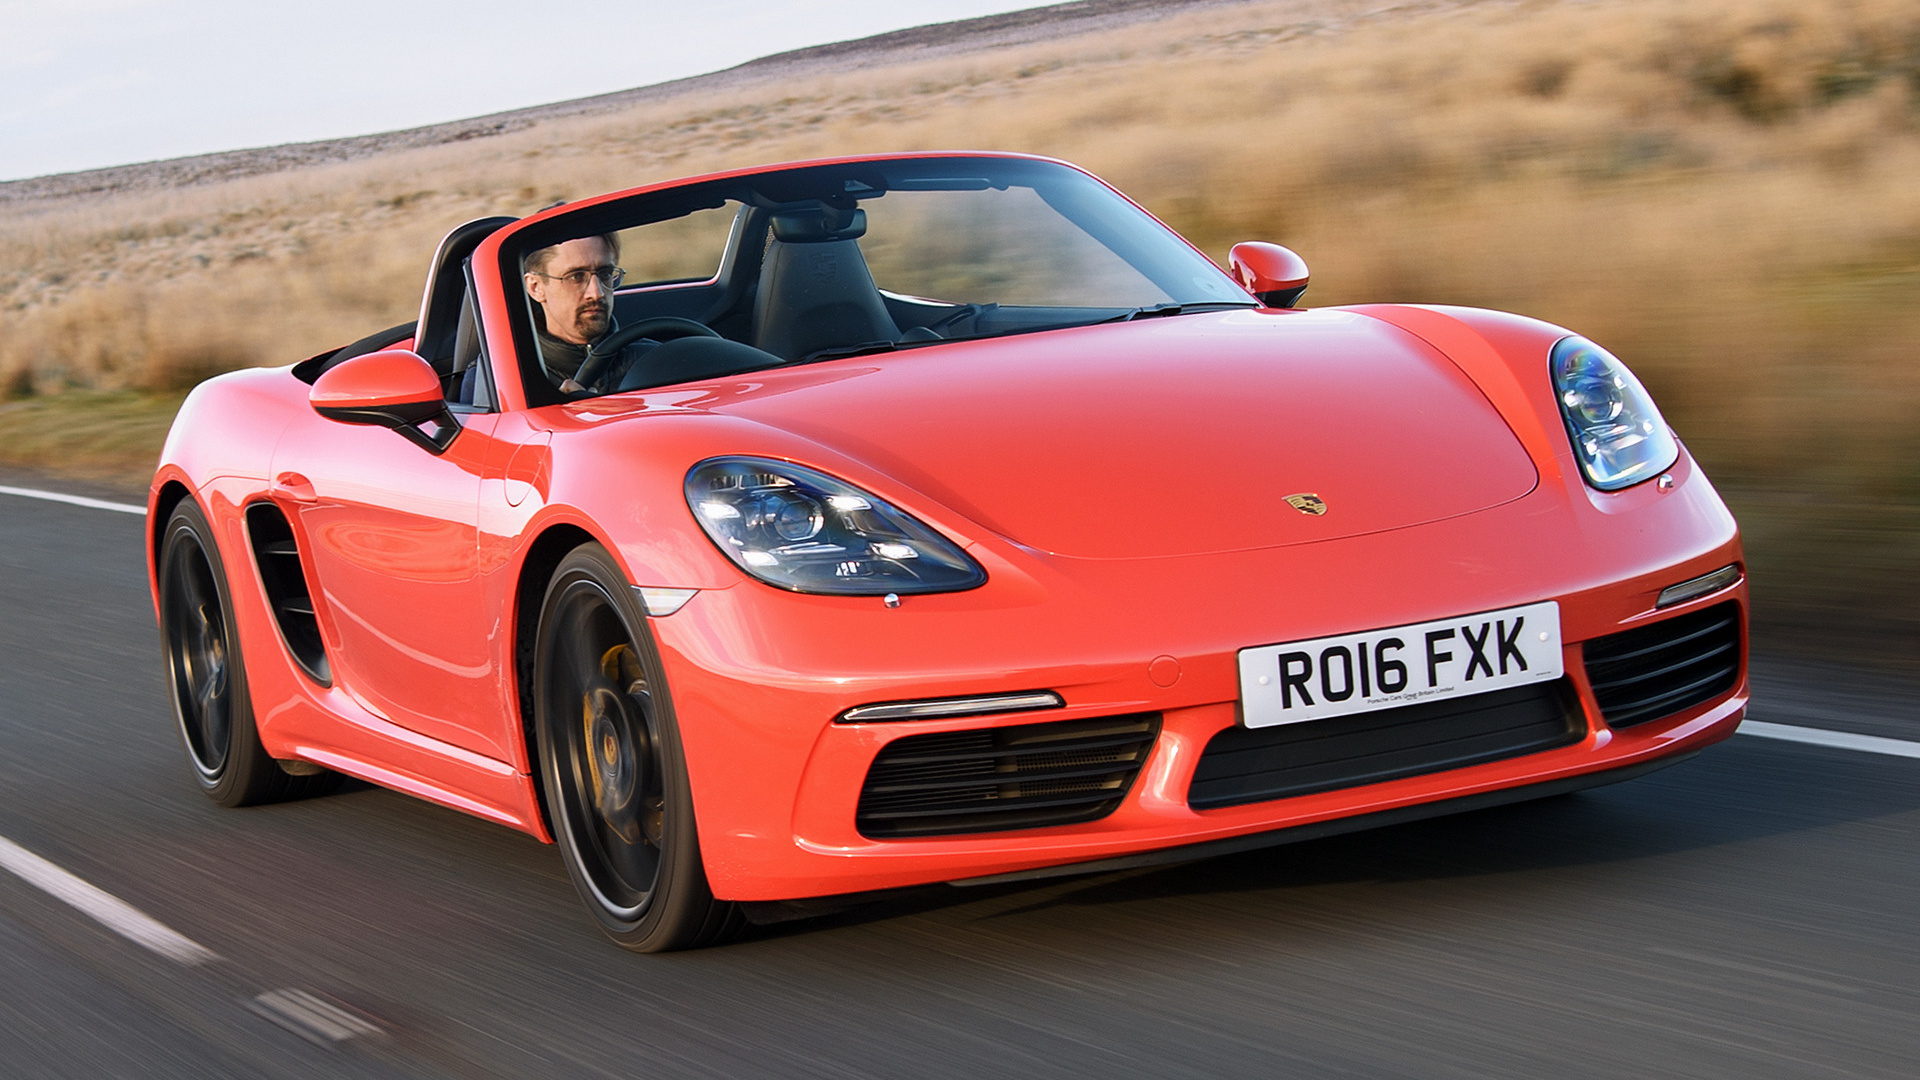 Porsche Boxster S Uk Wallpaper And HD Image